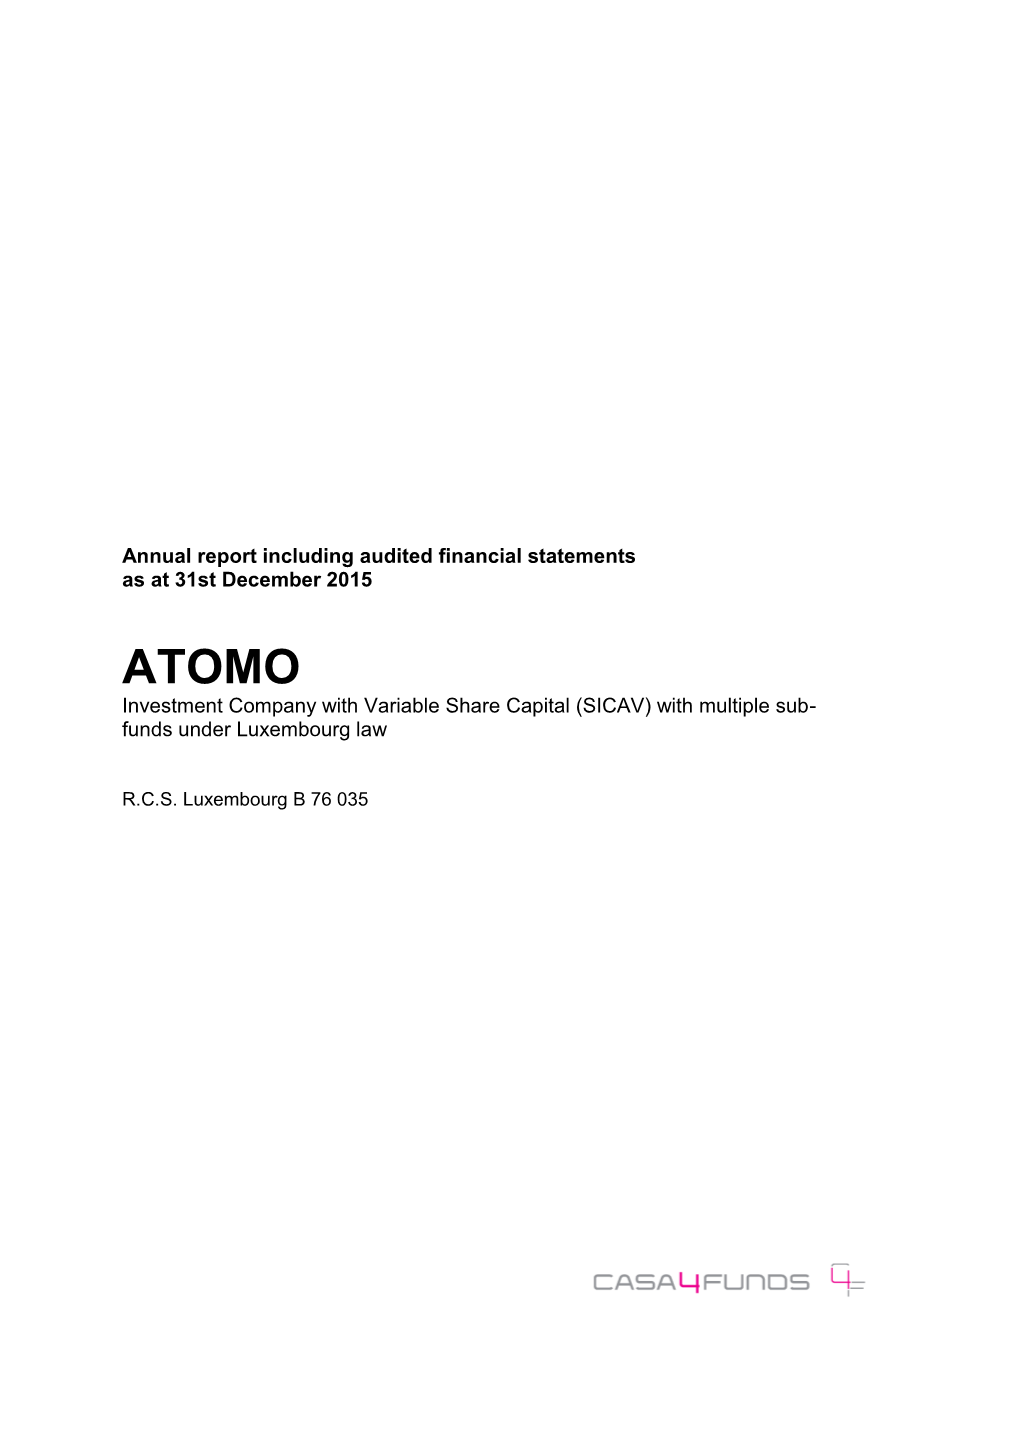 ATOMO Investment Company with Variable Share Capital (SICAV) with Multiple Sub- Funds Under Luxembourg Law